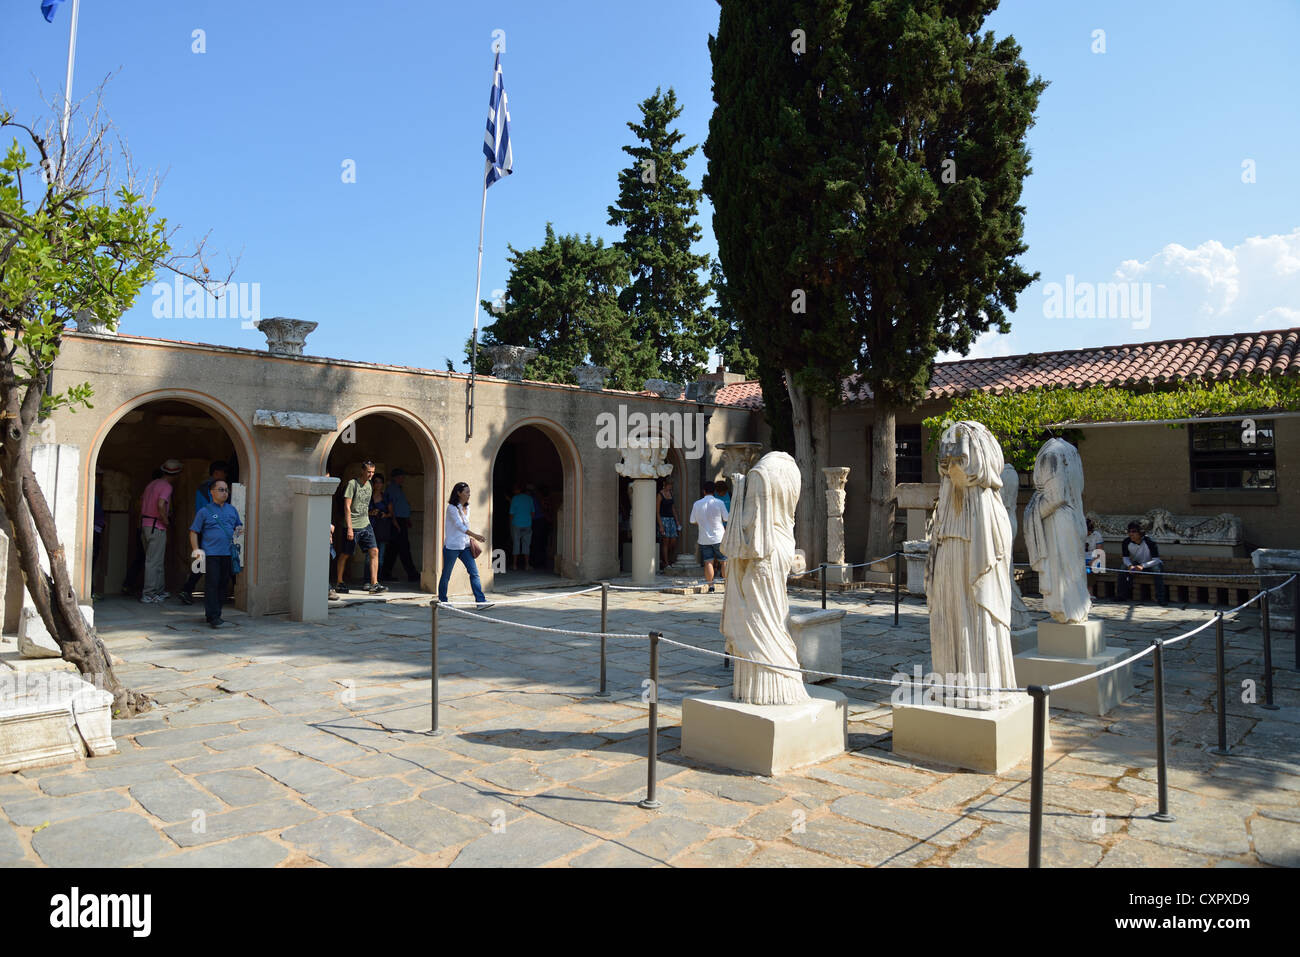 Courtyard of The Archaeological Museum of Ancient Corinth, Ancient Corinth, Corinth Municipality, Peloponnese Region, Greece Stock Photo